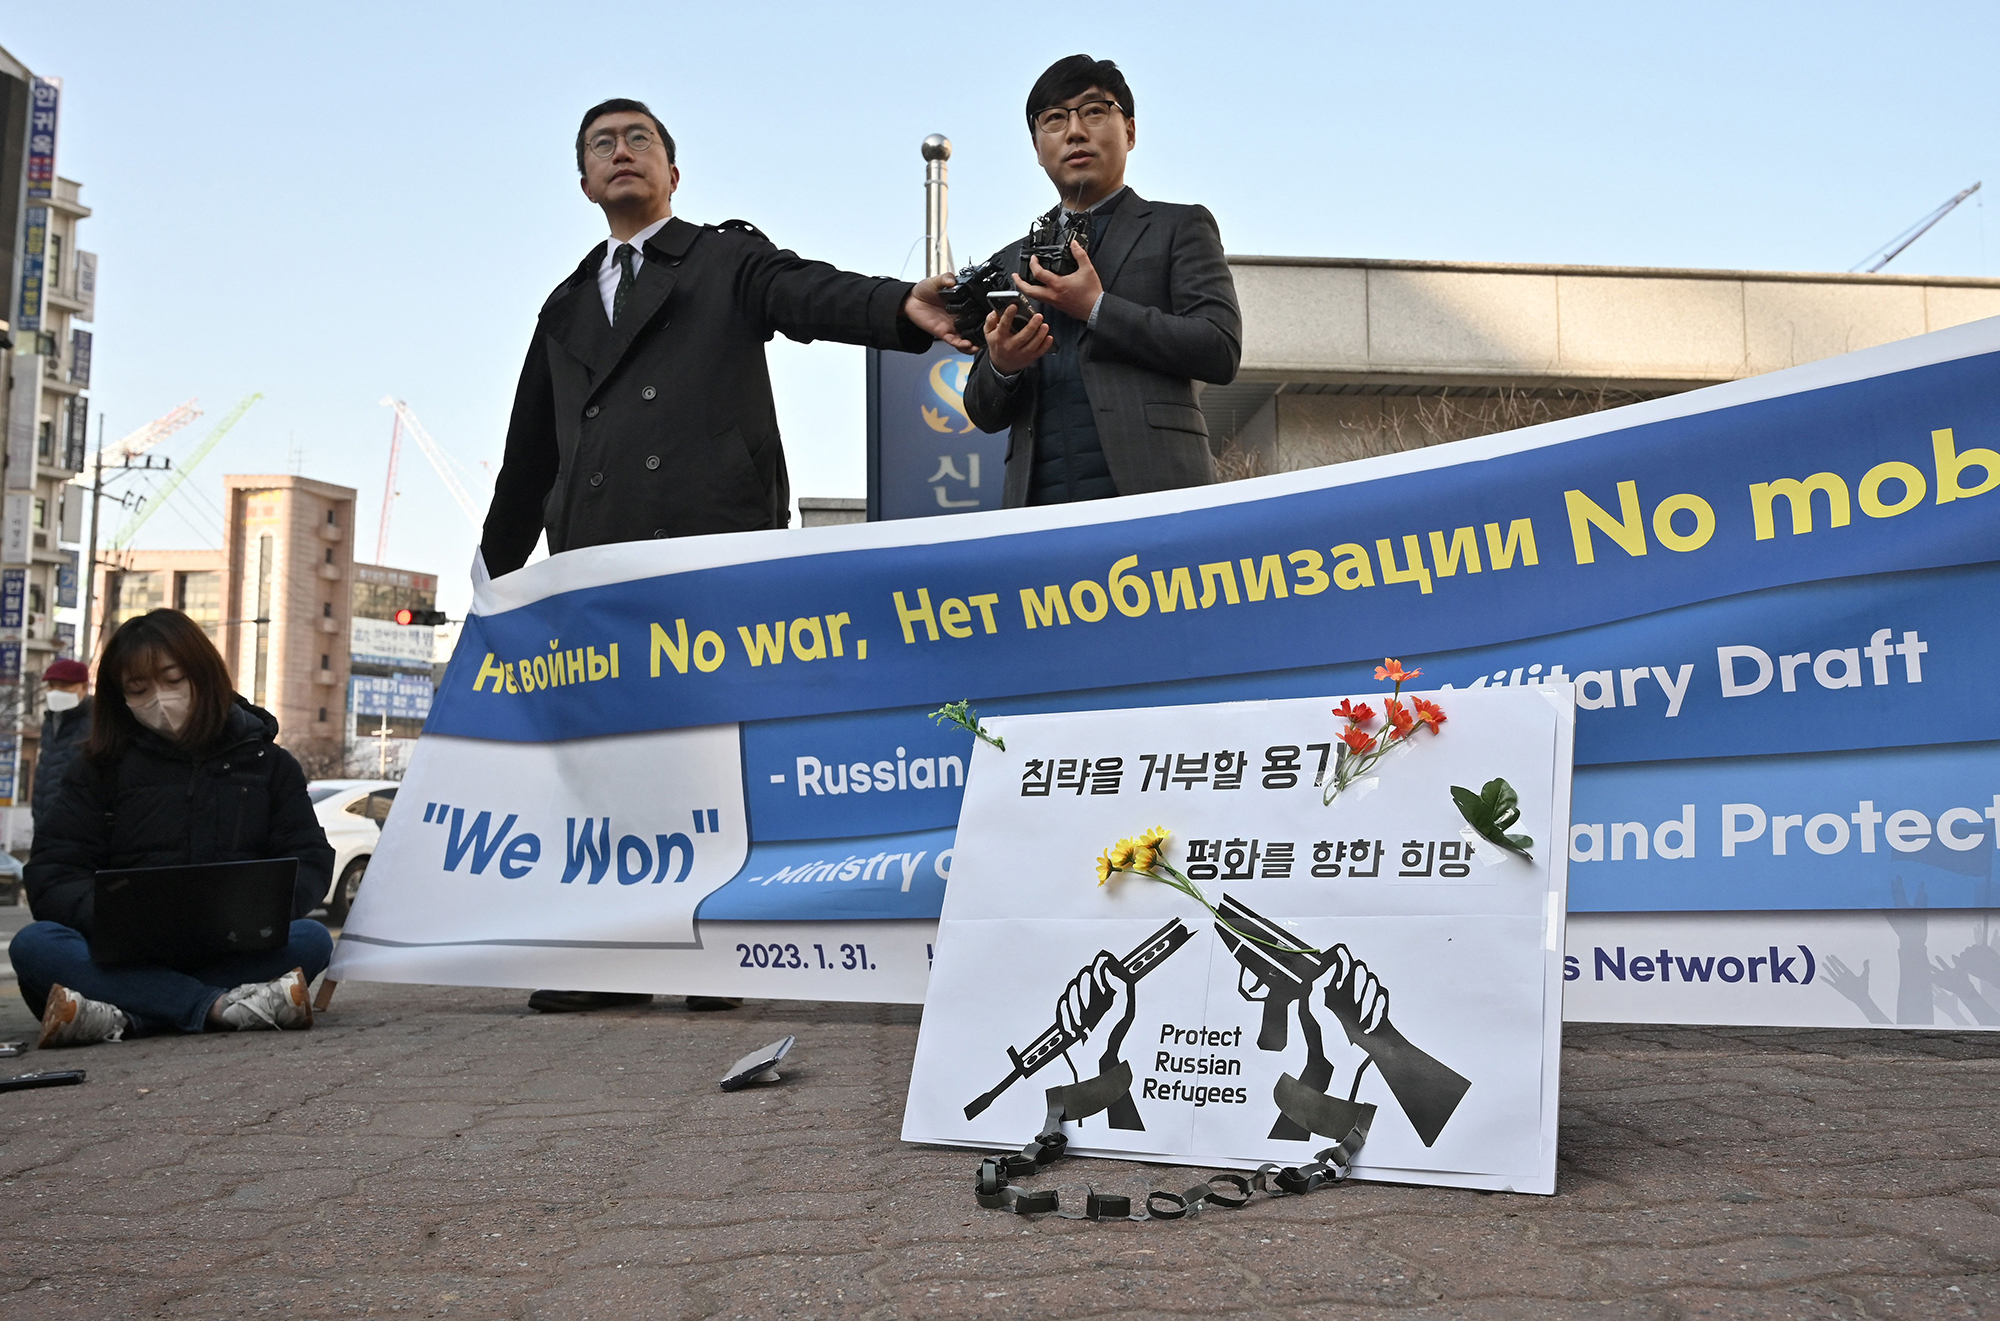 South Korean attorneys Lee Jong-chan, right, and Lee Il, center , who represent Russian asylum seekers stranded at Incheon International Airport, speak to reporters outside the district court in Incheon, South Korea, on February 14.